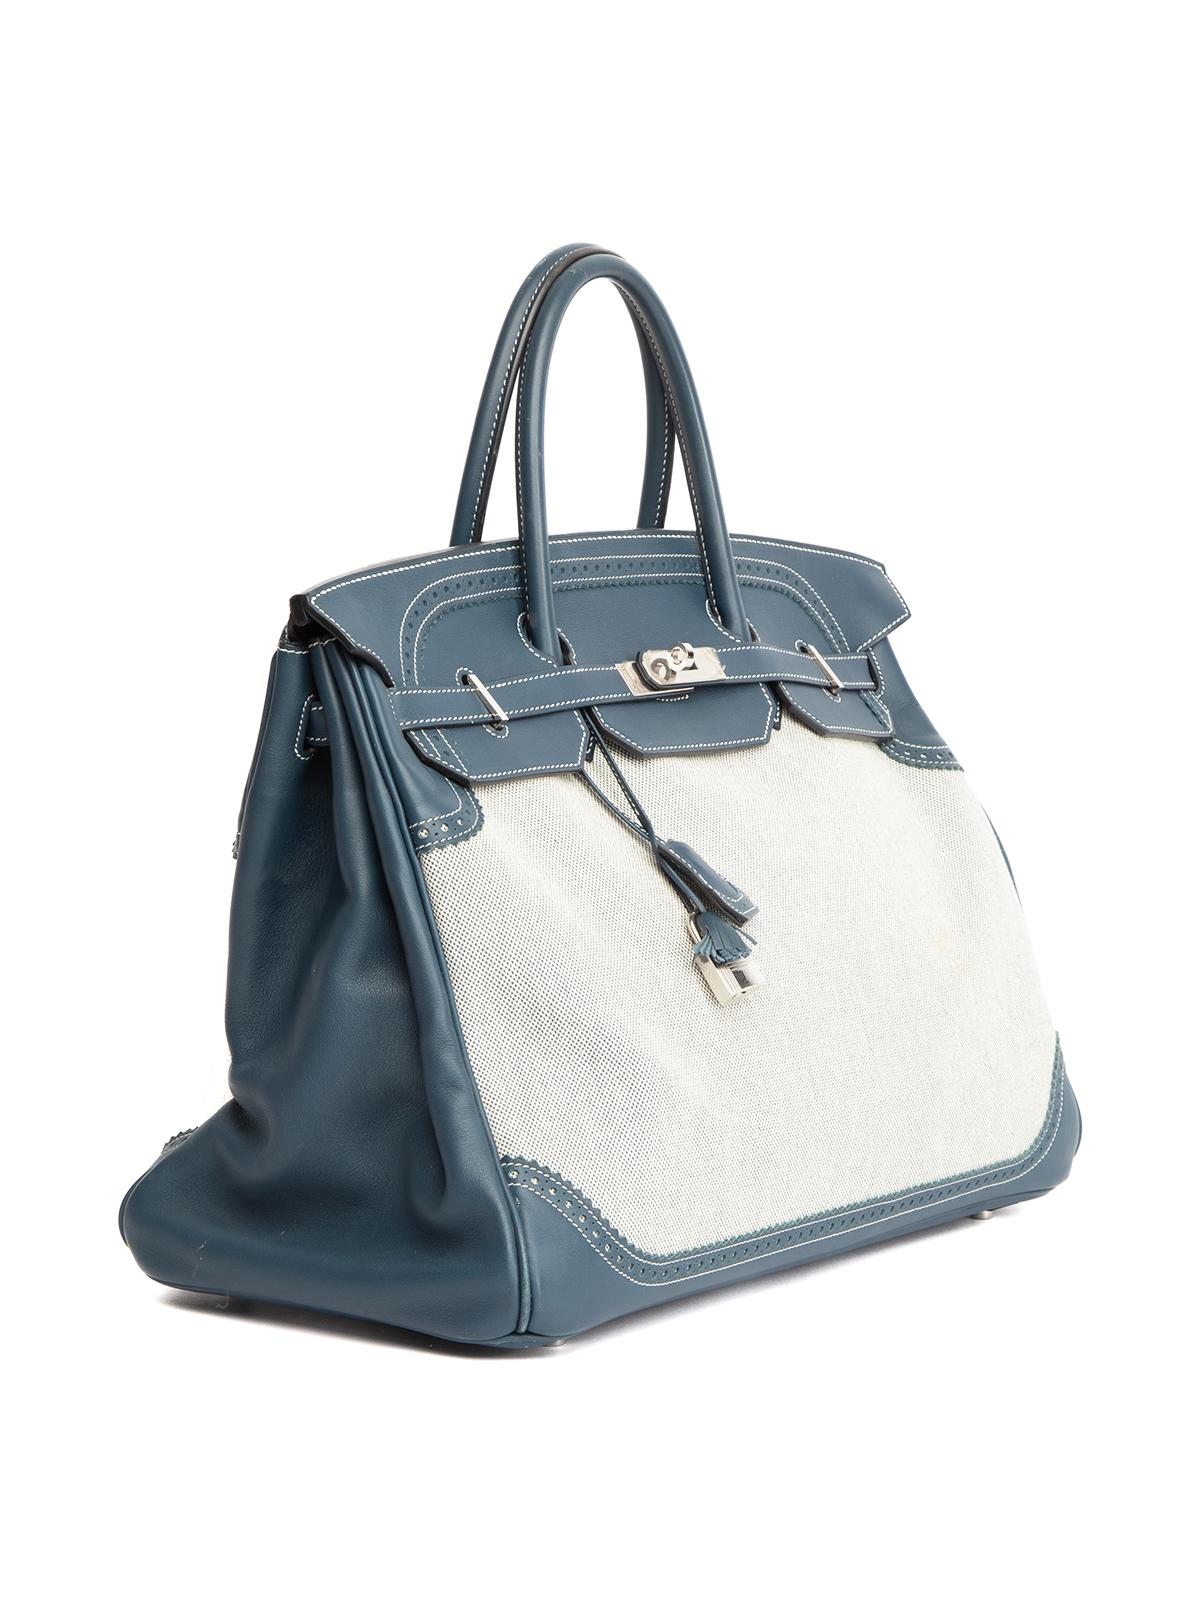 CONDITION is Very good. Minor wear to bag is evident. Light wear to canvas material and exterior leather, interior, and handle on this used Hermes designer resale item. Details Colour - blue and grey Material - leather and canvas Handles x 2